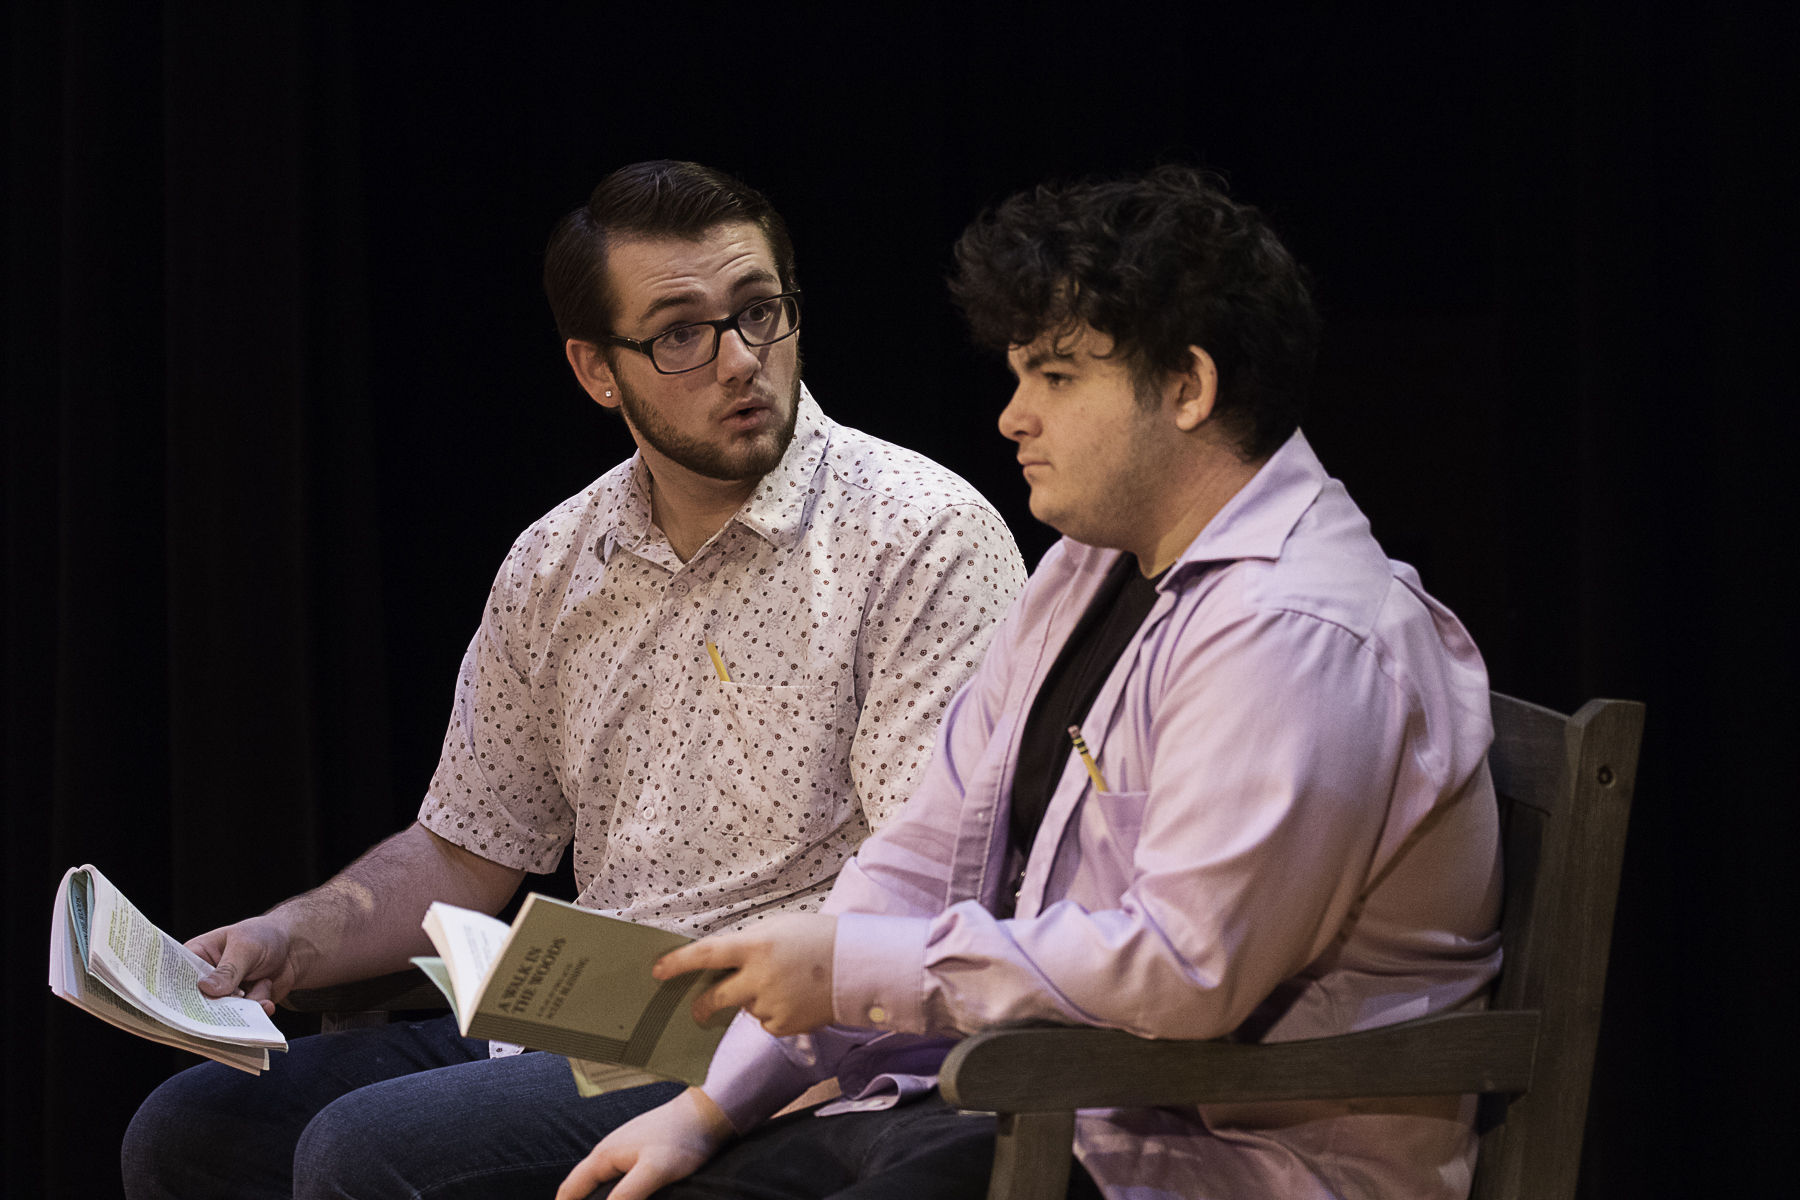 A WALK IN THE WOODS - WCJC Drama Department tackles Cold War play